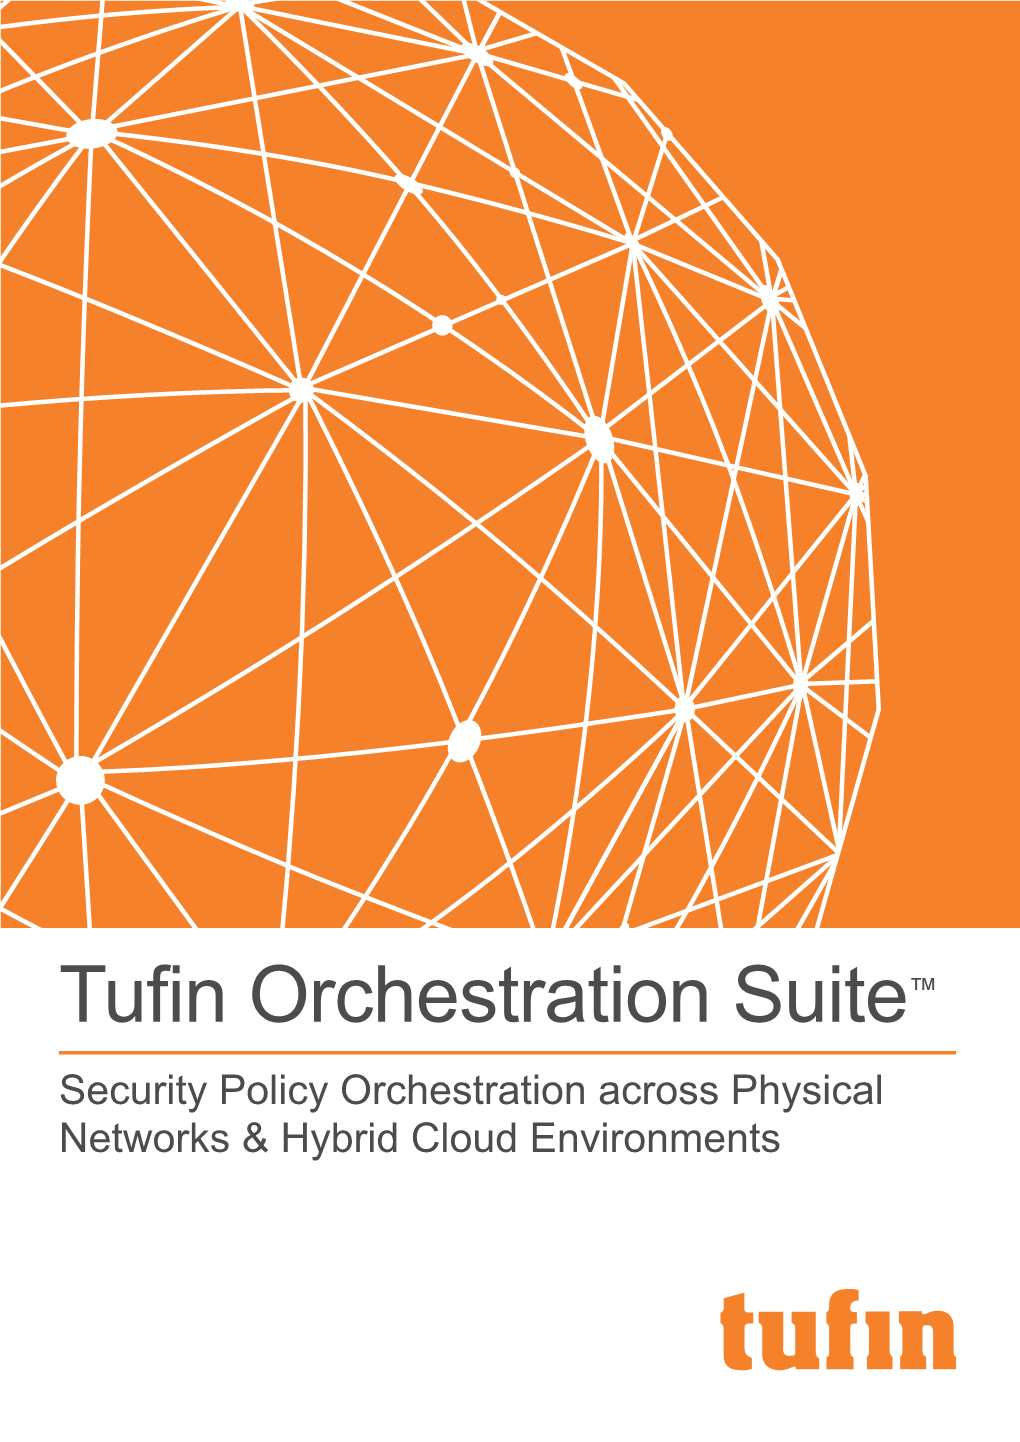 Tufin Orchestration Suite™ Security Policy Orchestration Across Physical Networks & Hybrid Cloud Environments the Network Security Challenge